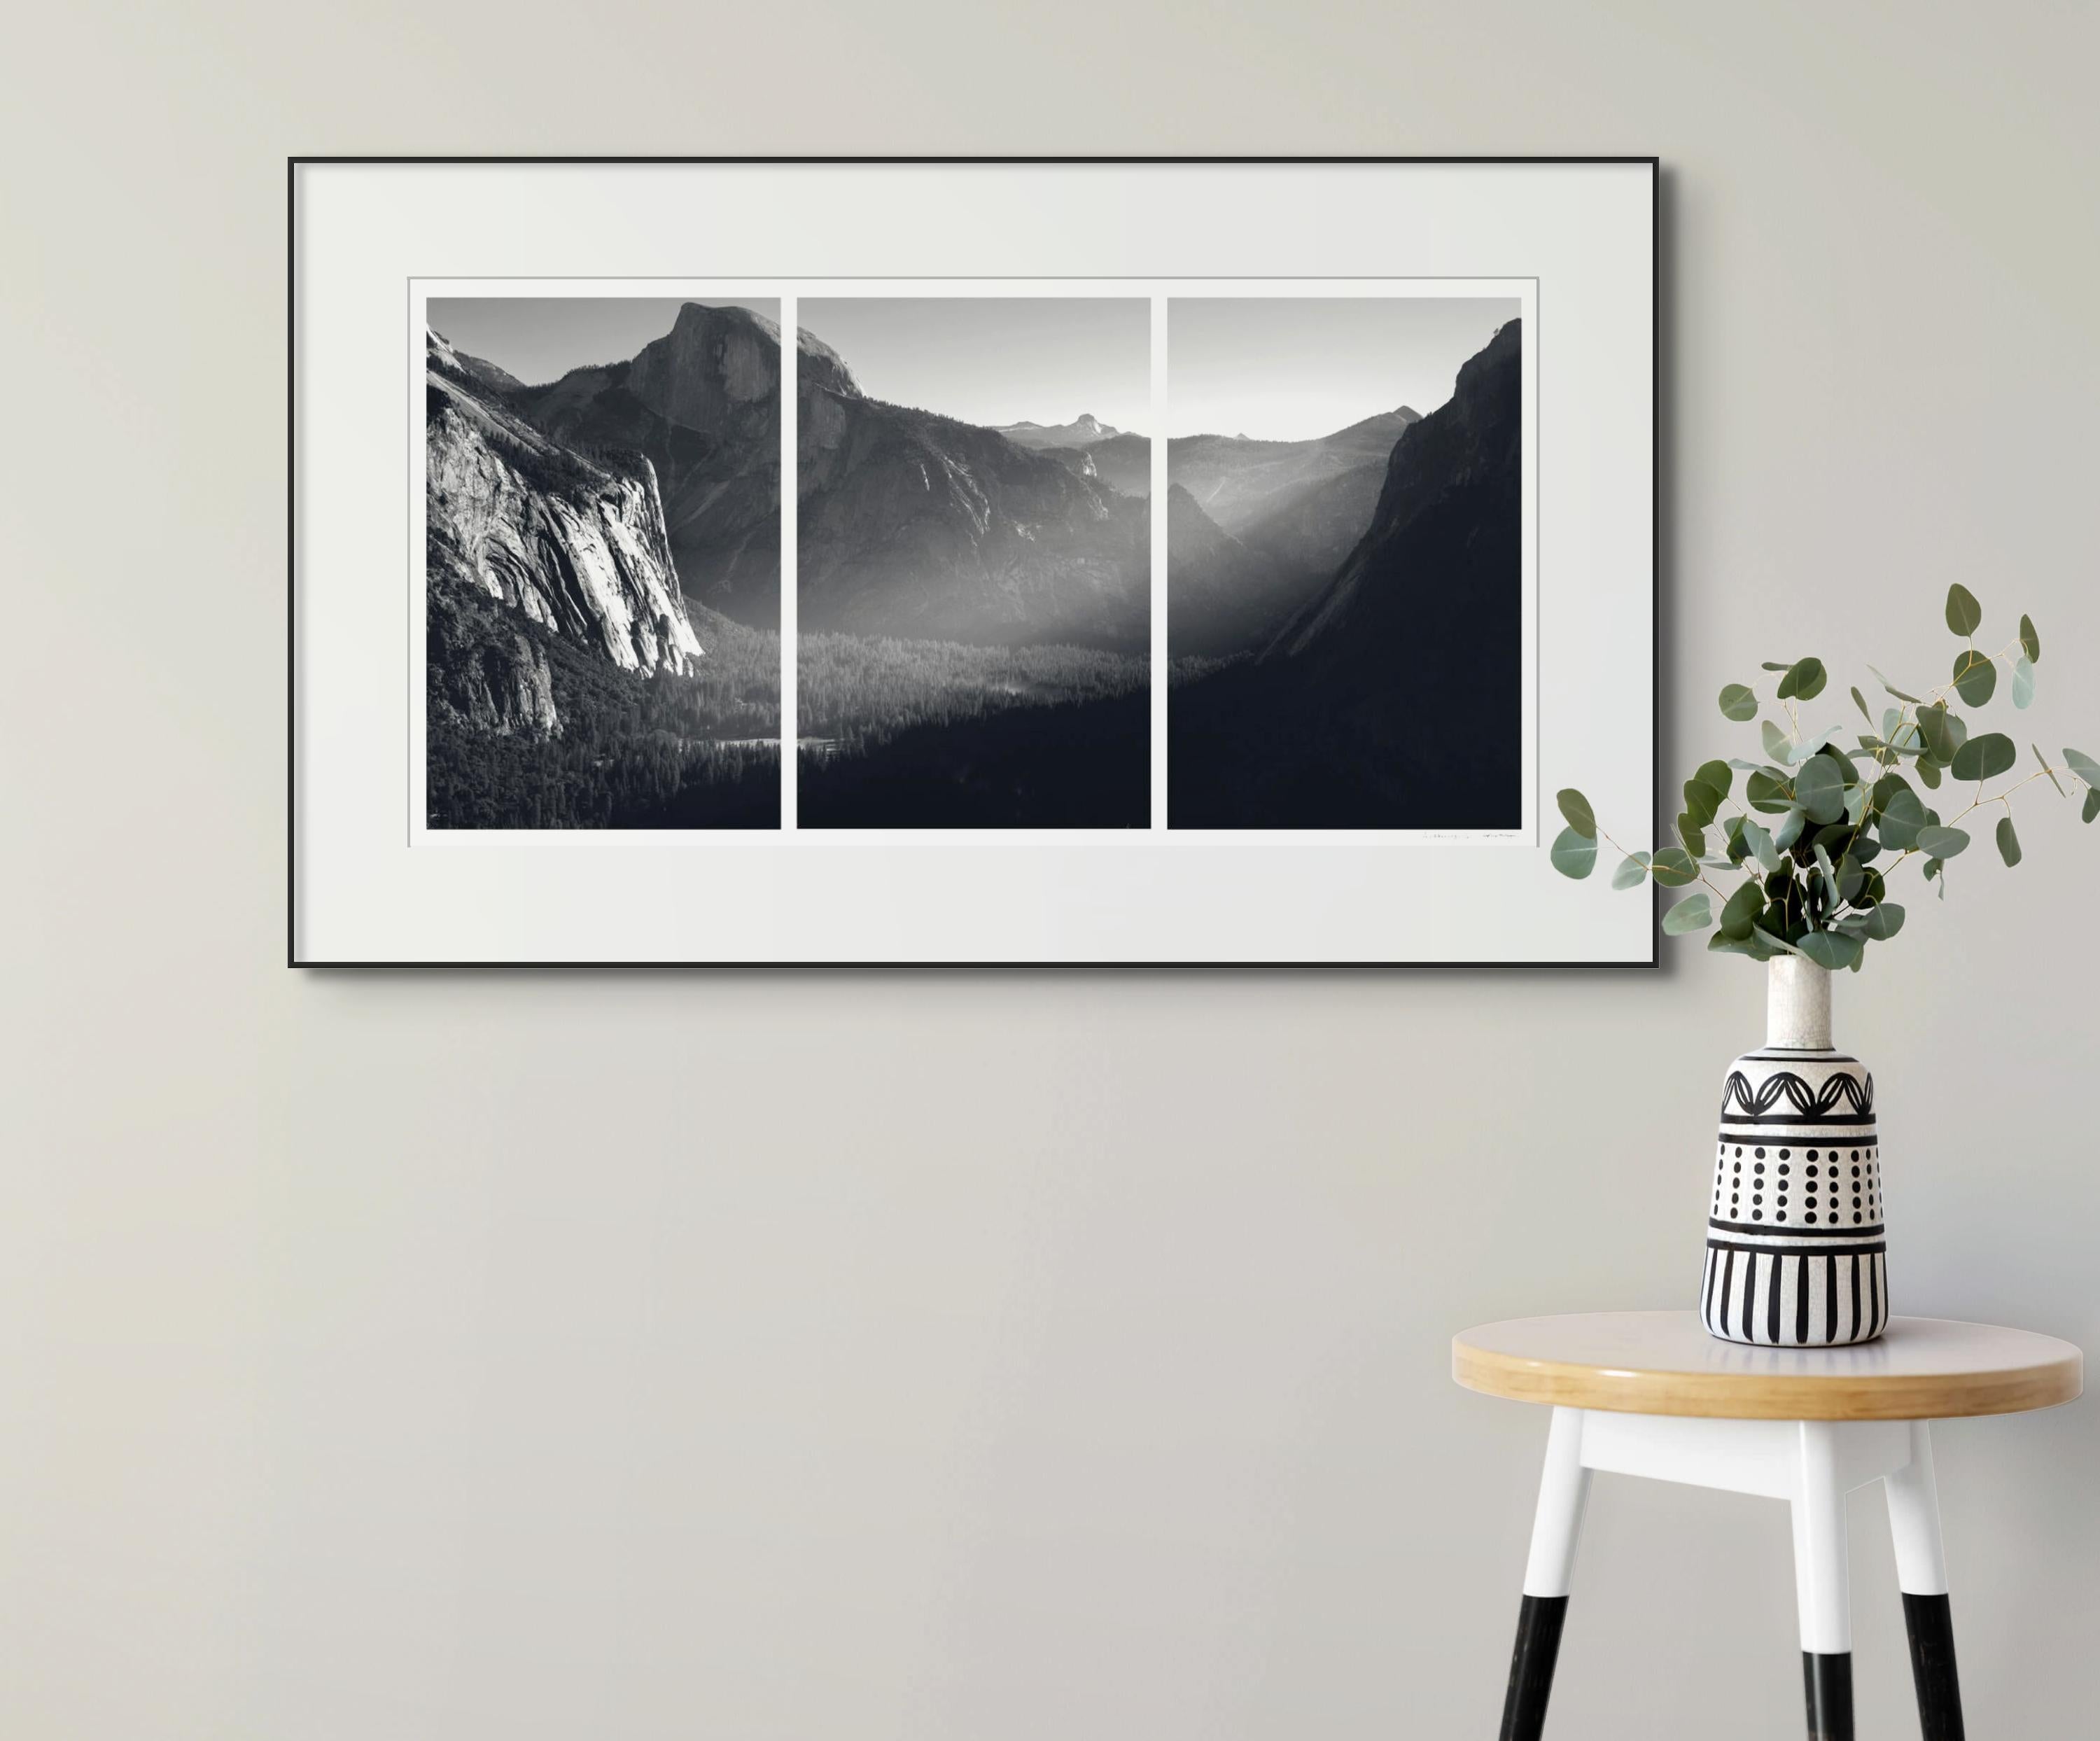 'Awakening' 
Archival photographic triptych. Limited Edition of 25. Unframed.
_________________
Morning light illuminates the layered landscape of Yosemite National Park, Half Dome gently awakens. Sophia's poetic photographs are an exploration of